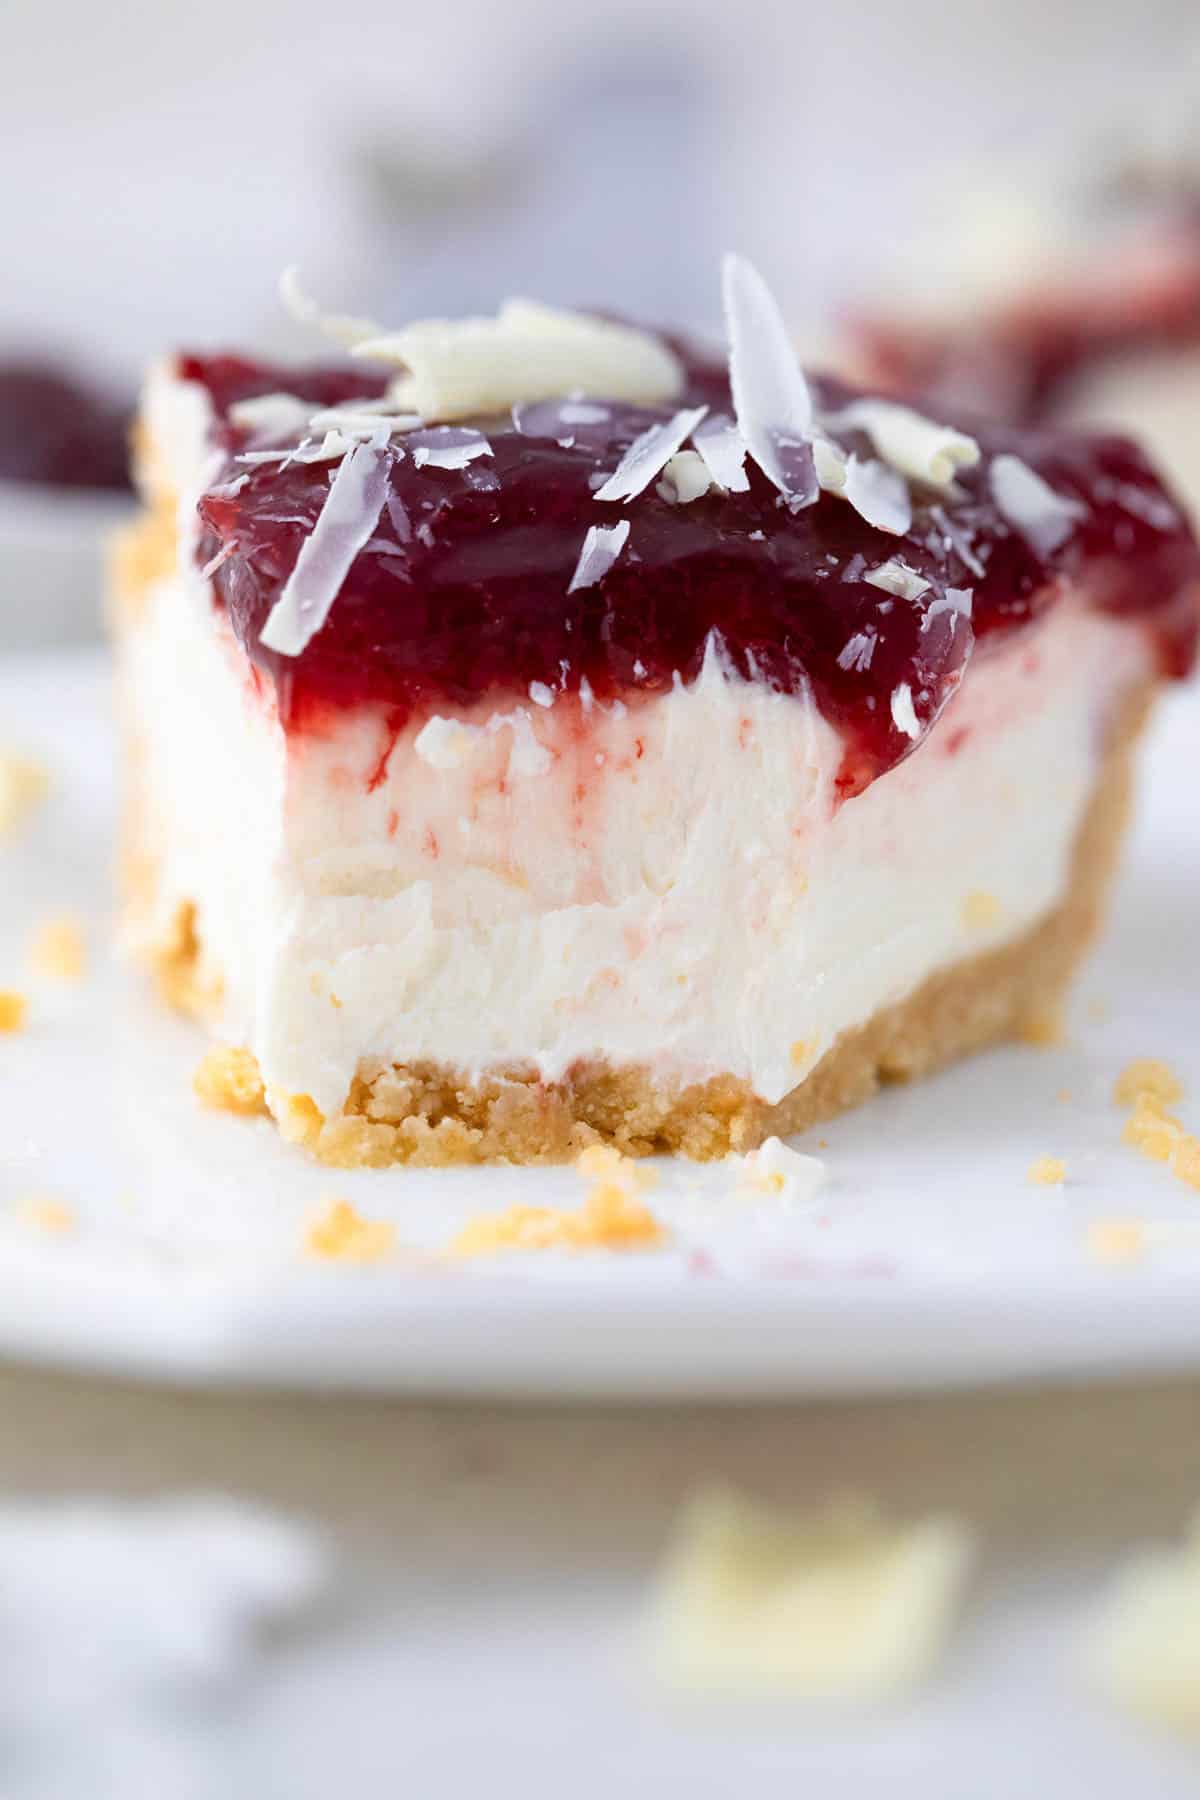 Slice of cherry cheesecake with a bite taken out of it